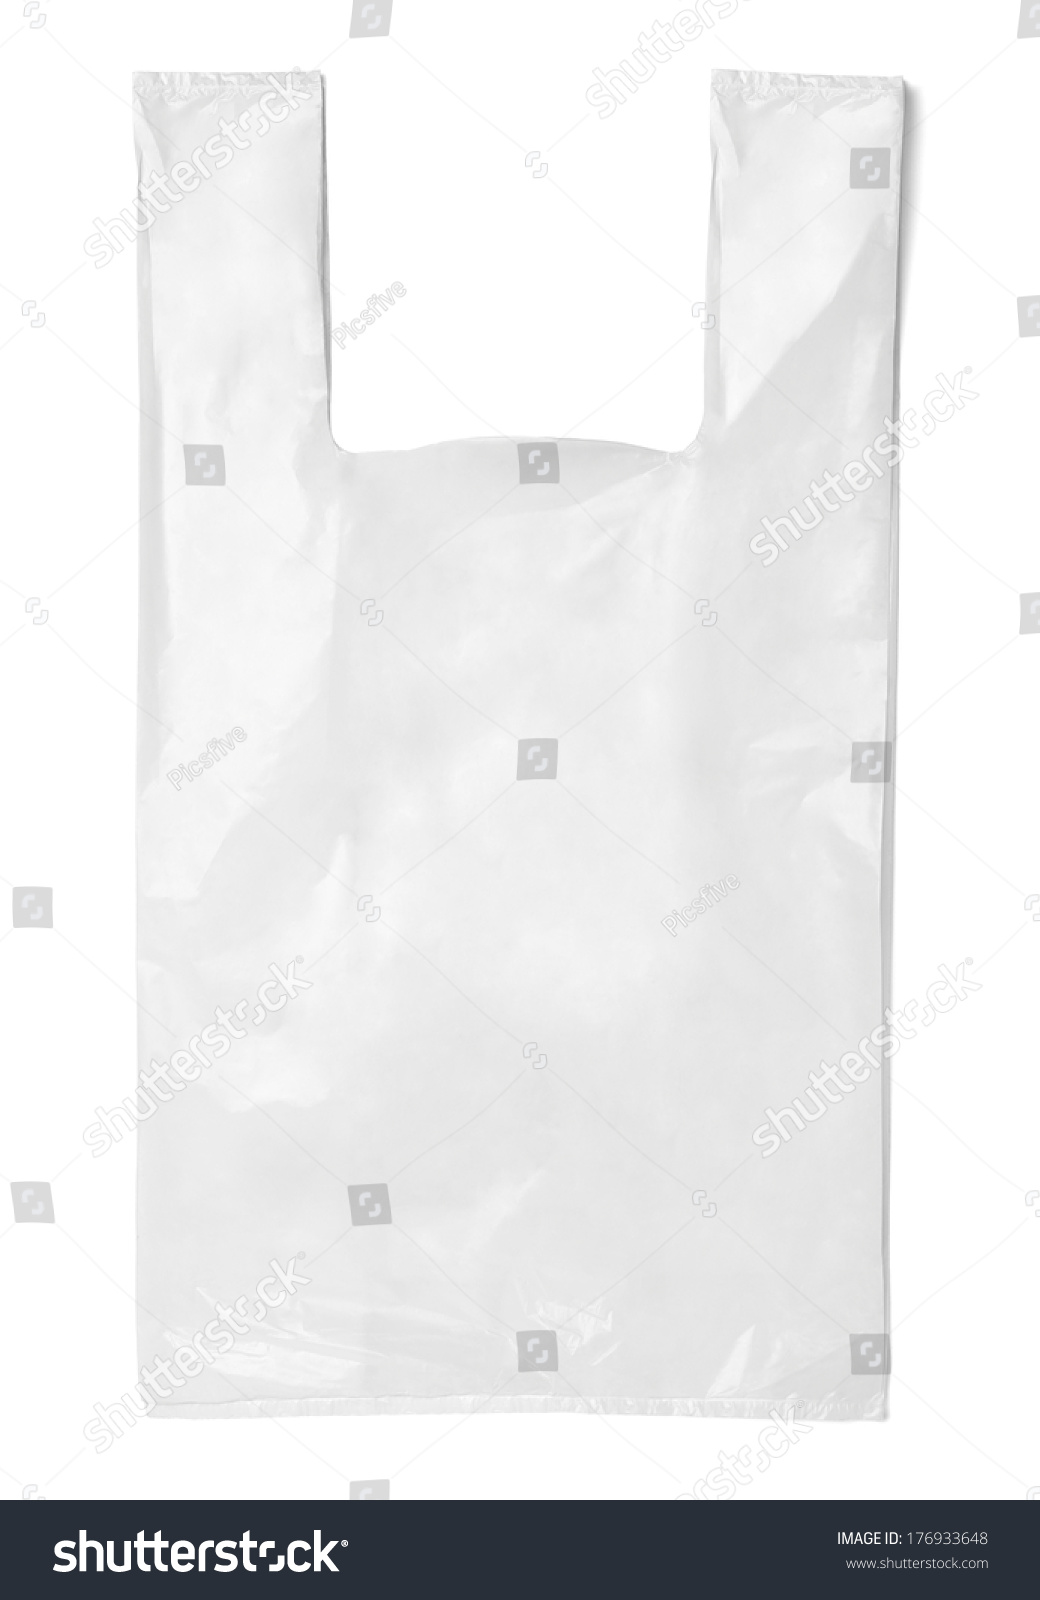 close up of  a white shopping bag on white background #176933648